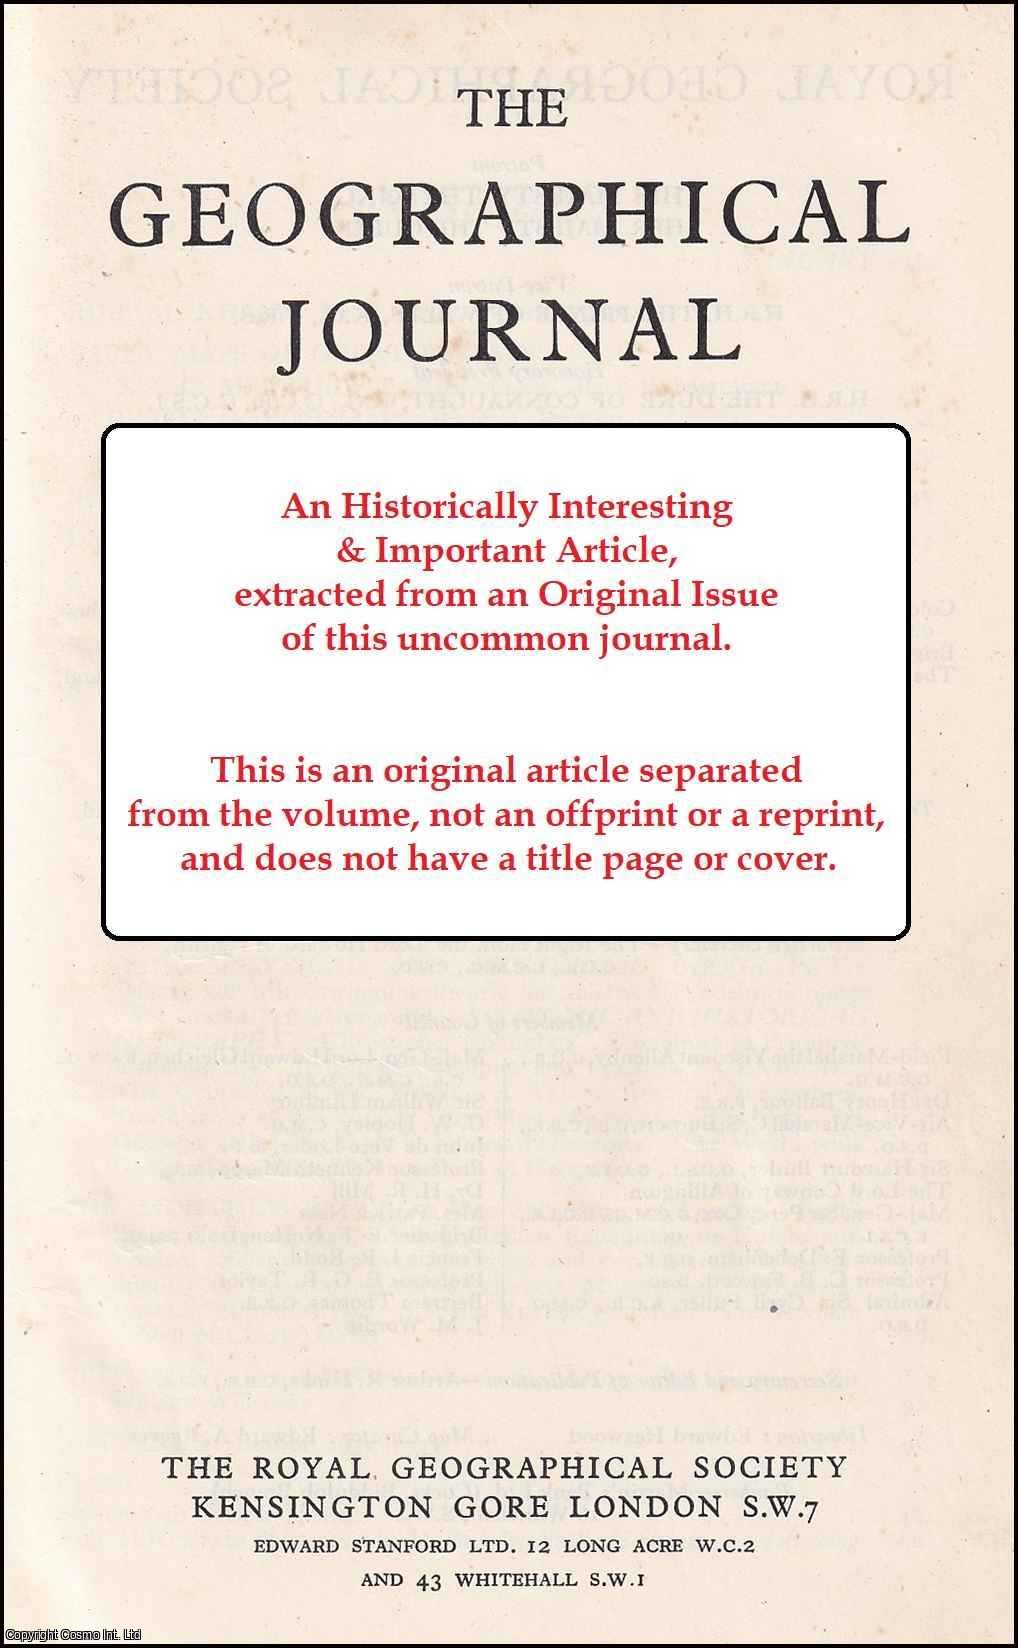 Andrew C. O'Dell - Port Facilities and The Dispersal of Industry: The Problem in Scotland. An original article from the Geographical Journal, 1941.